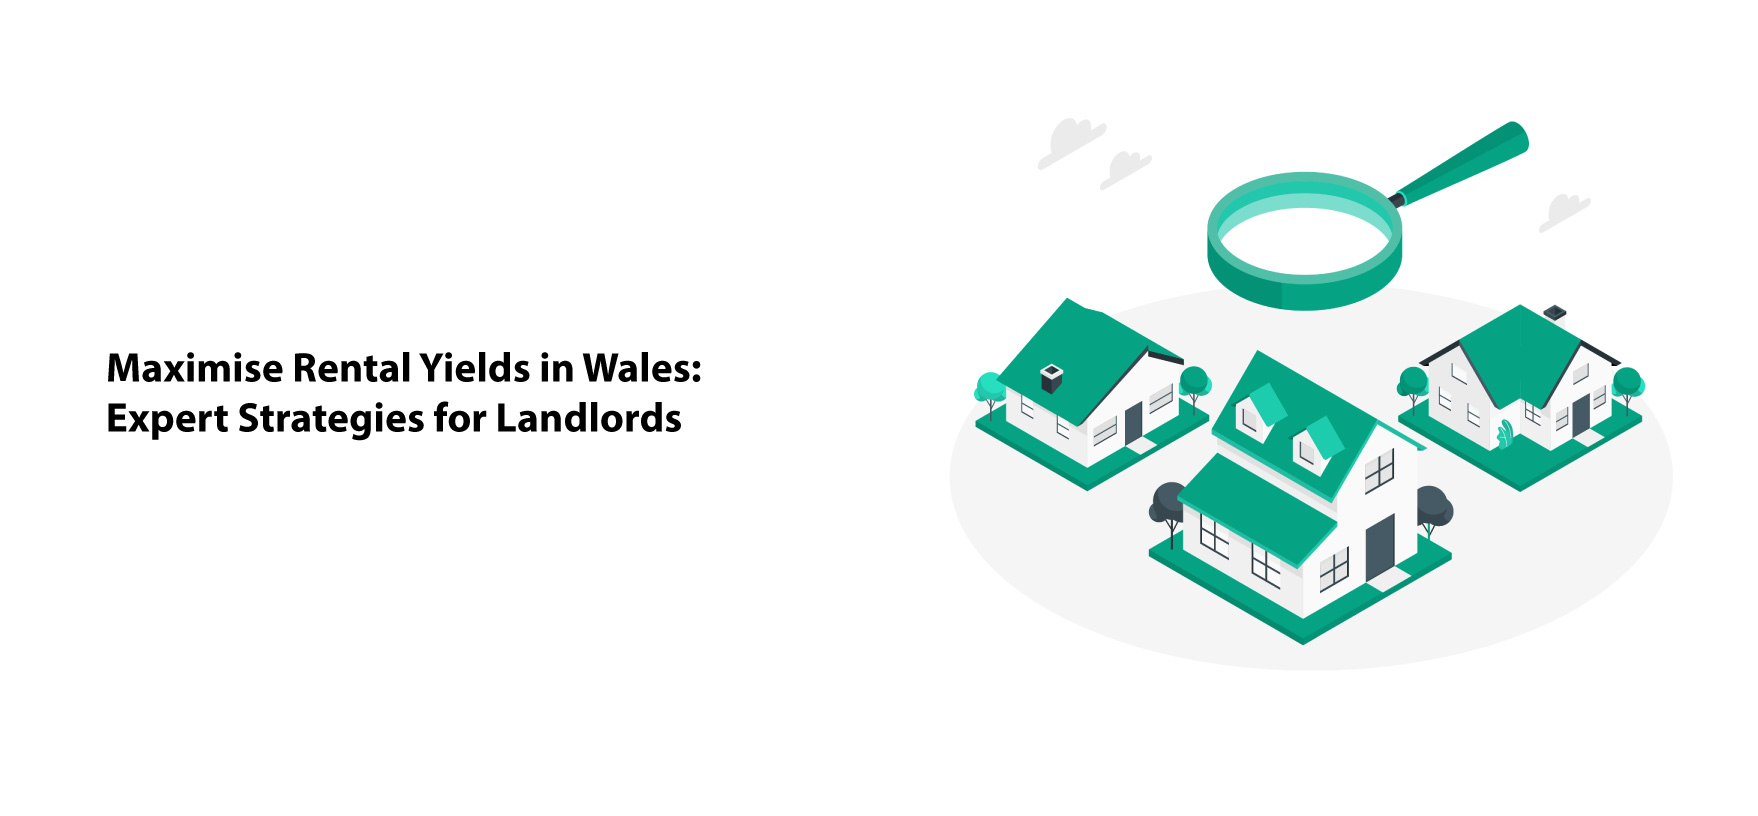 Maximise Rental Yields in Wales: Expert Strategies for Landlords